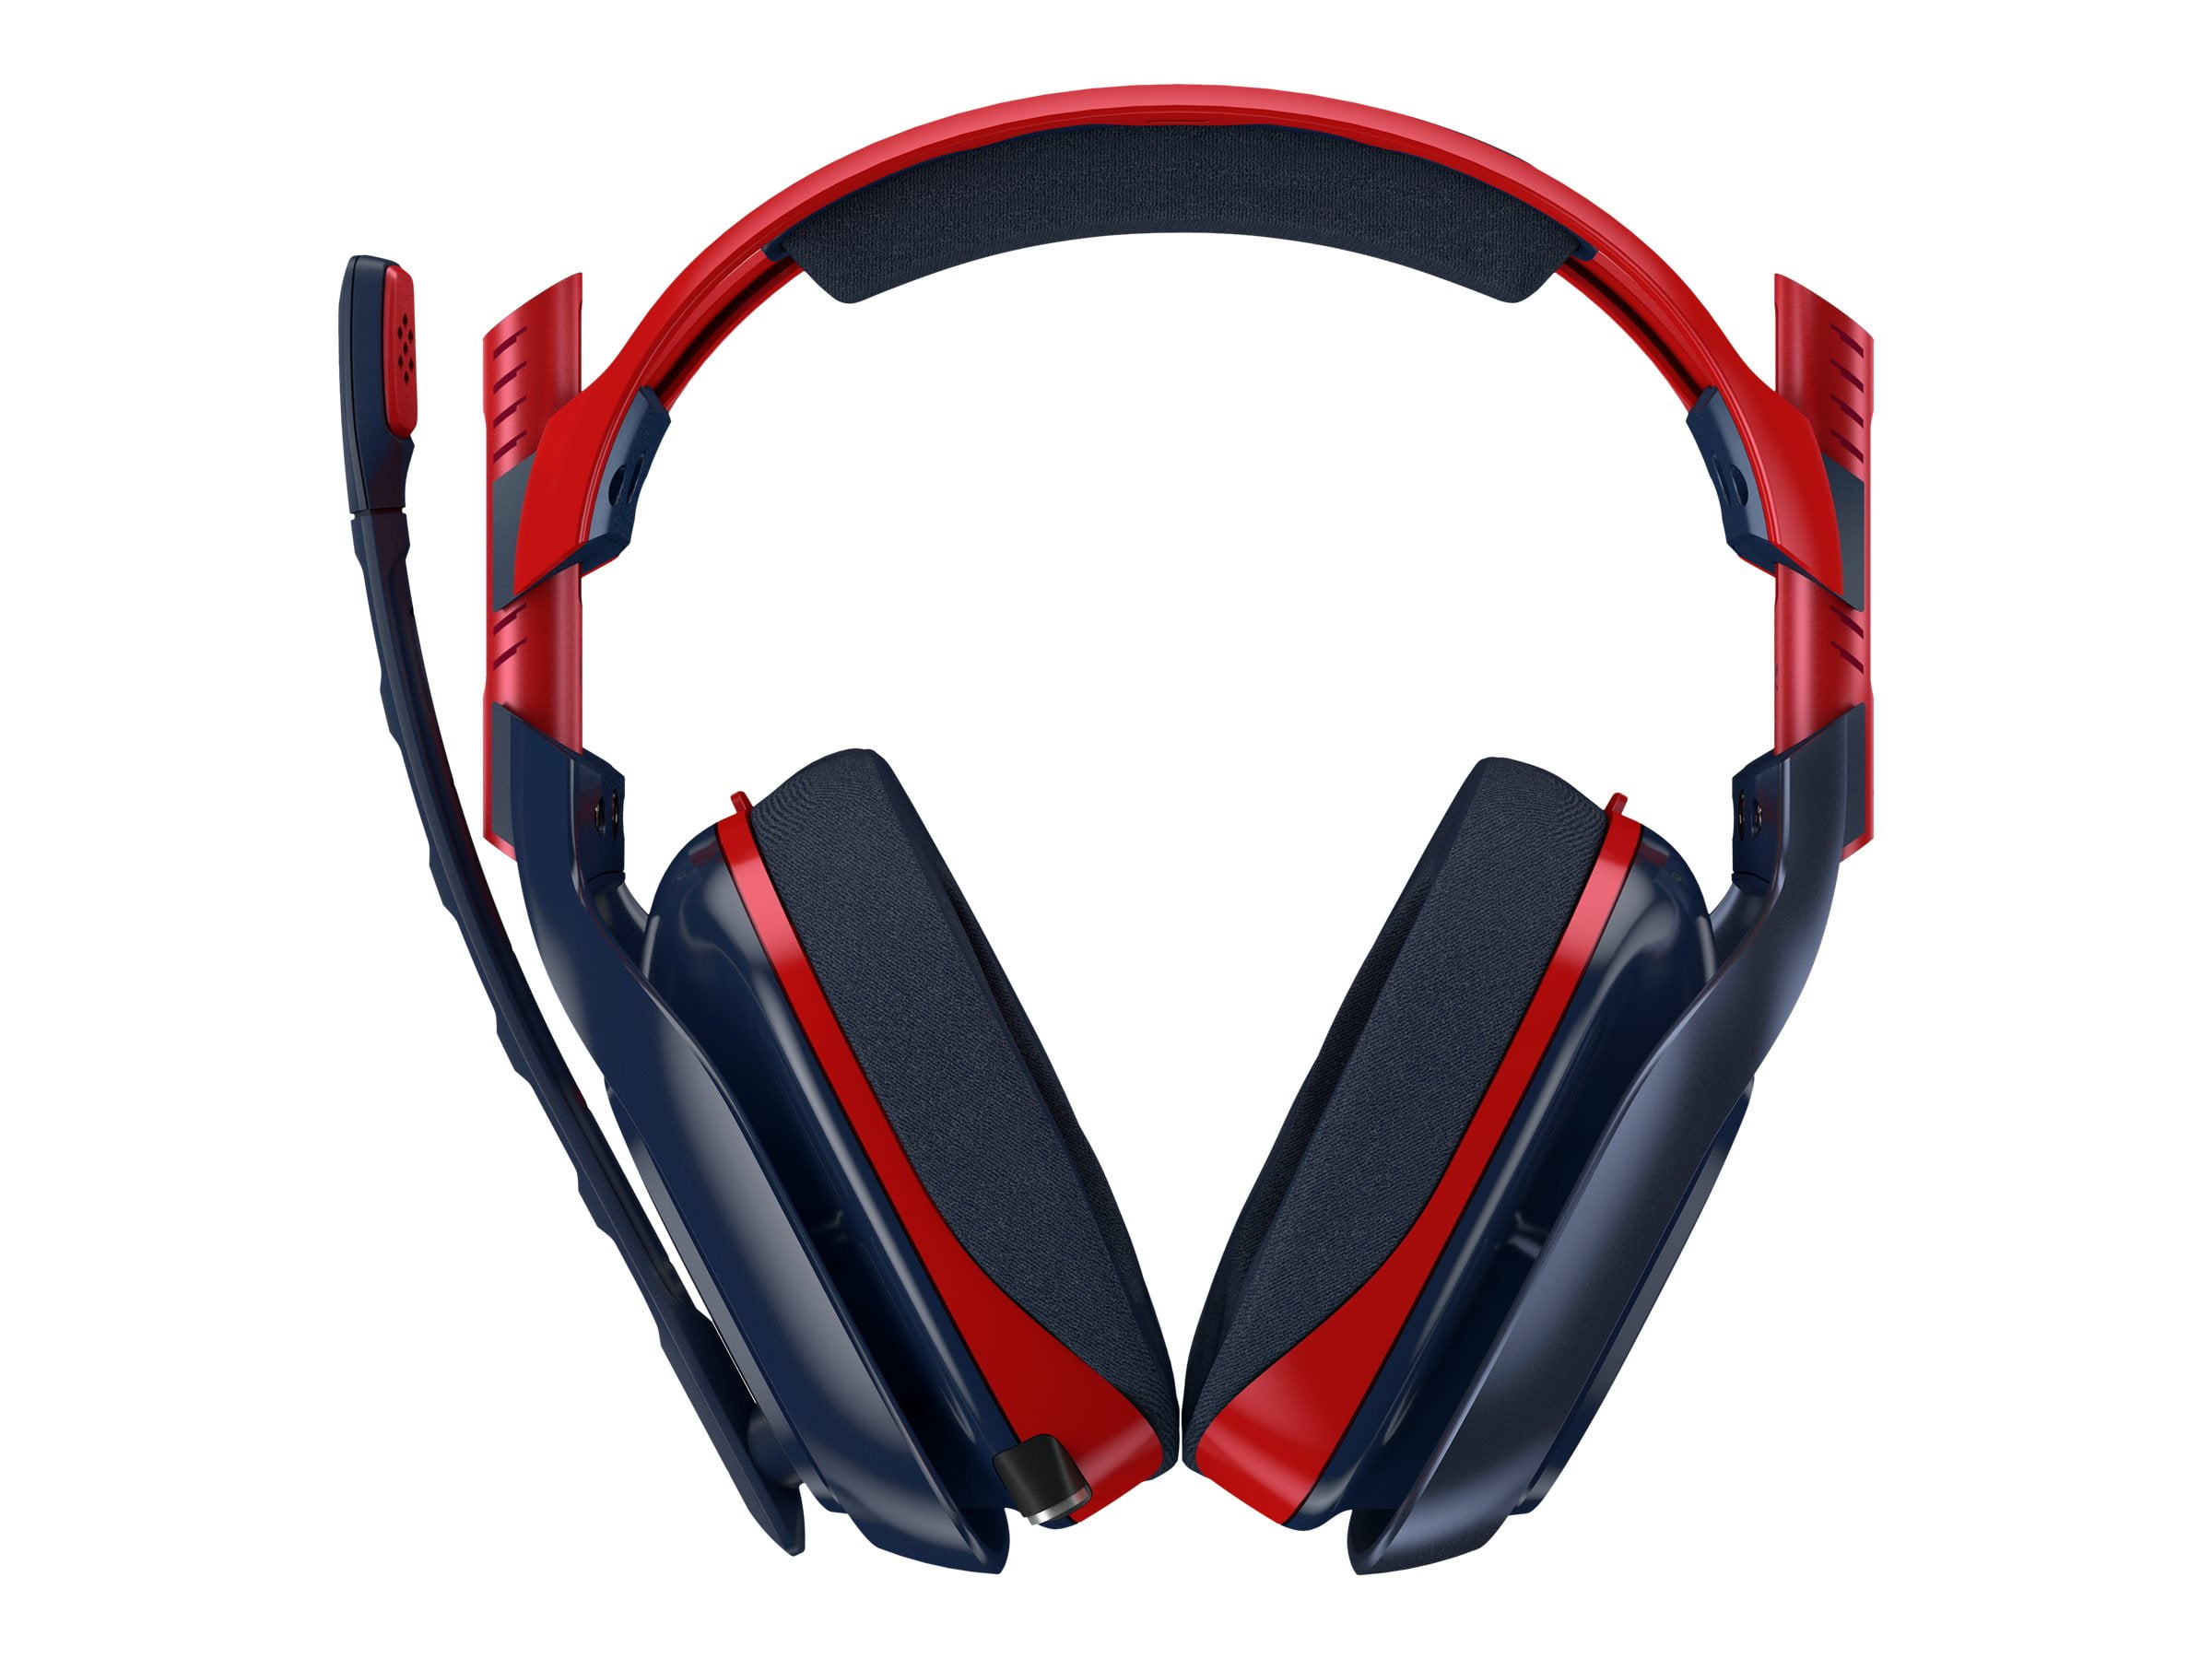 Buy ASTRO Gaming A40 TR X-Edition Wired Stereo Over-the-Ear Gaming Headset, Red/Black Online at Lowest Price in India. 405288095